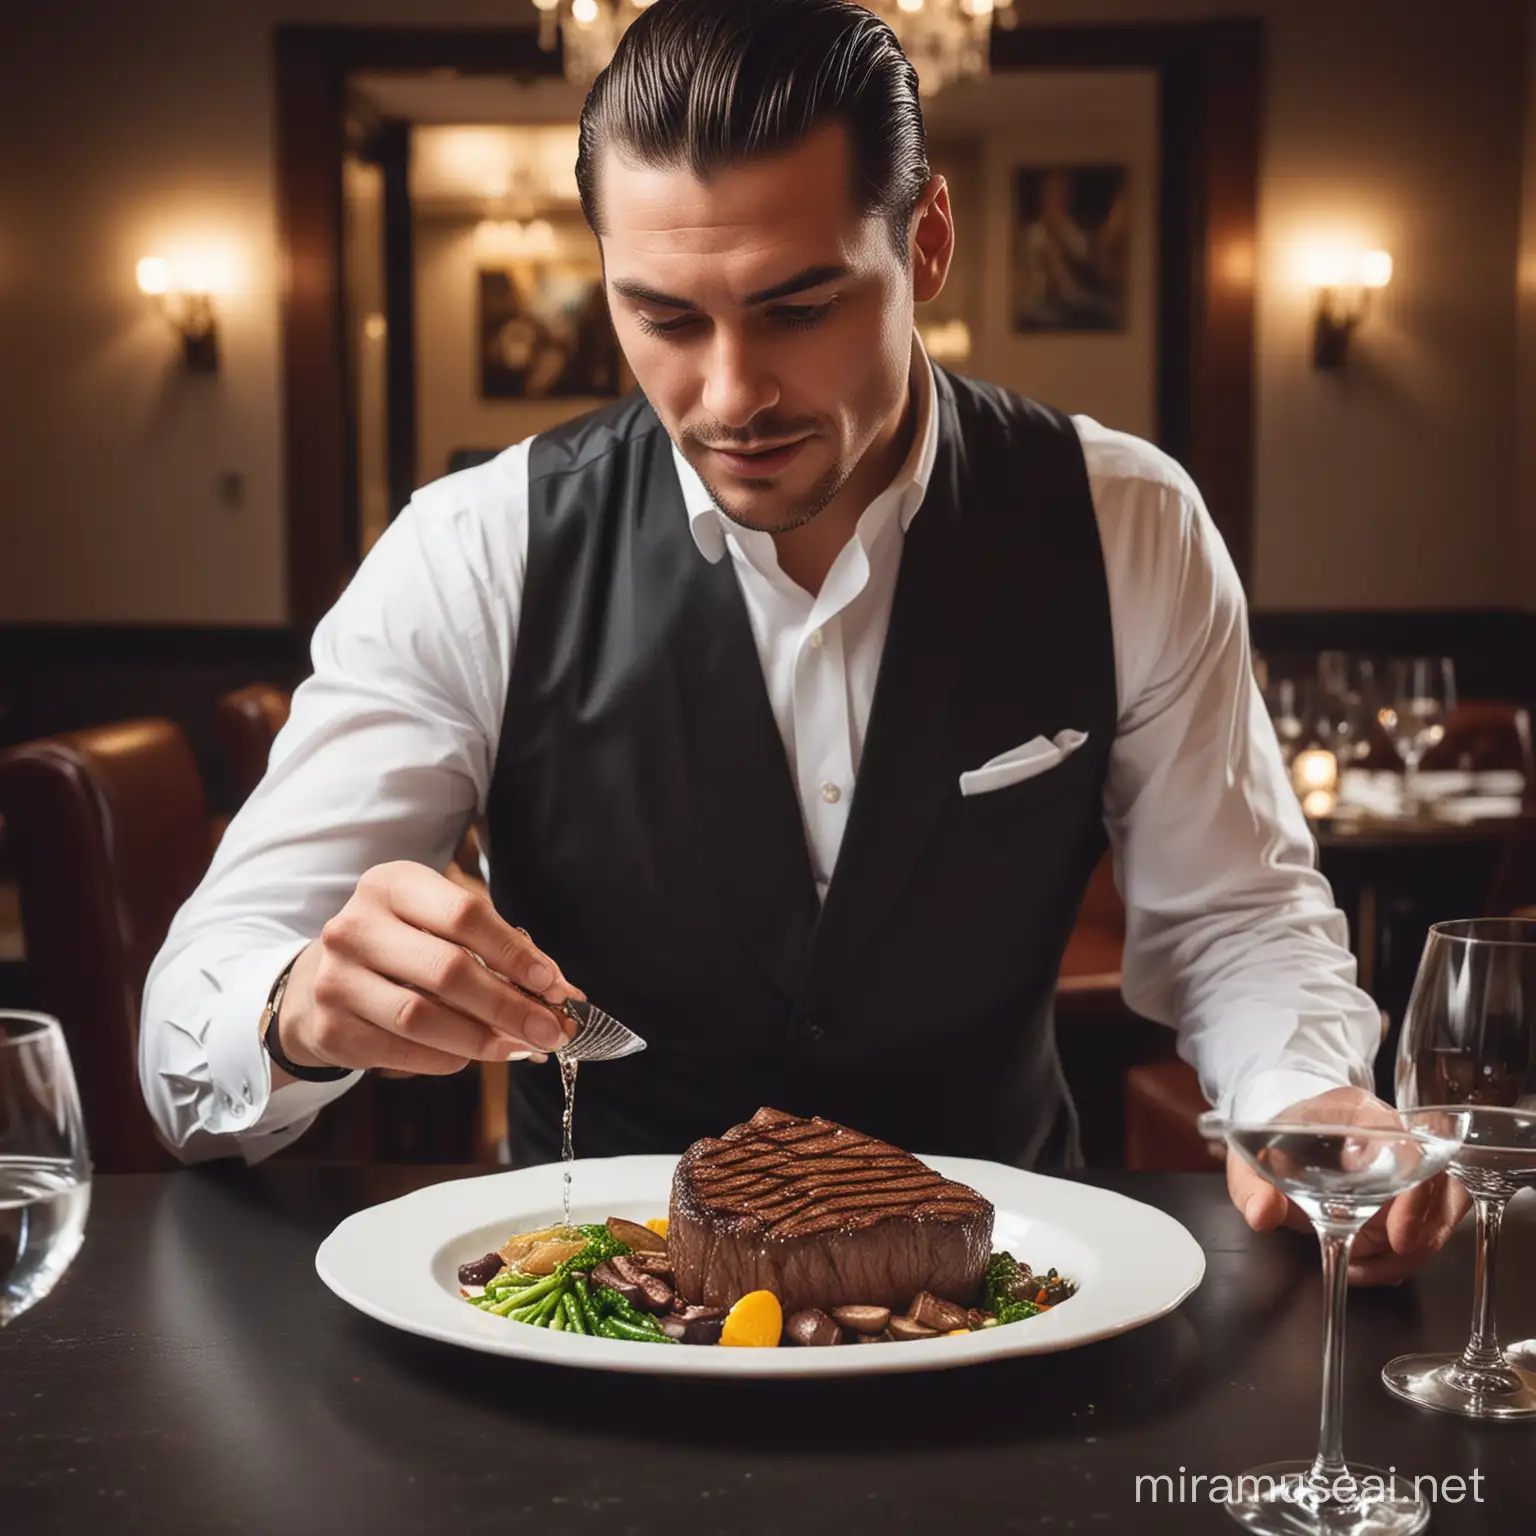 Elegant Man Pouring Water on Steak in Upscale Restaurant